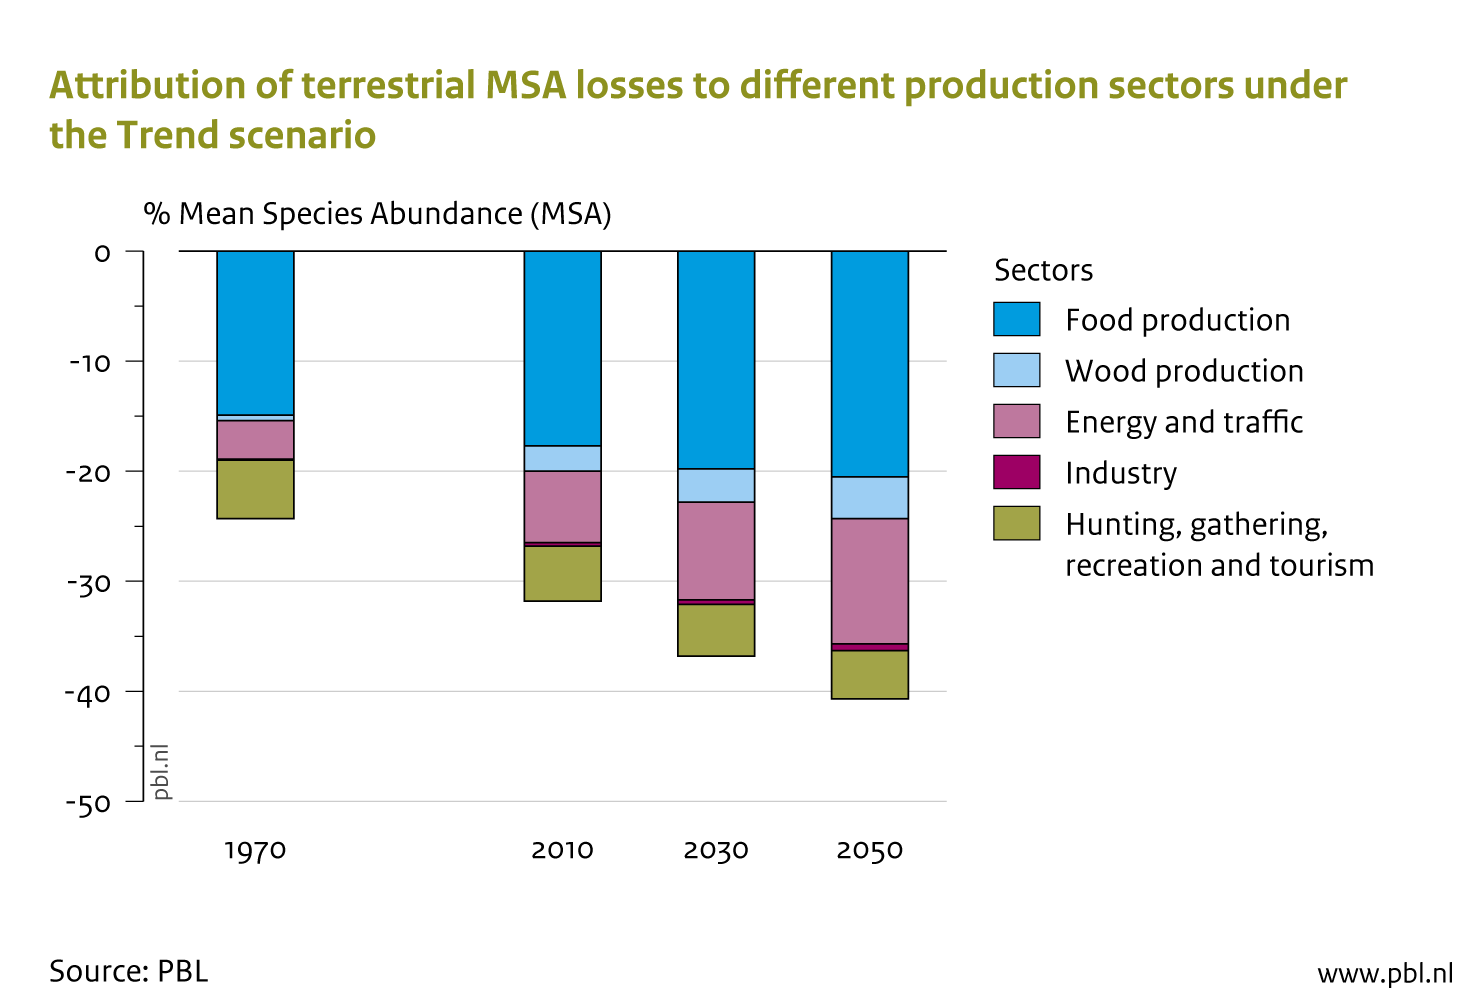 In addition to the sectors of agriculture, forestry, fisheries and water, the energy and transport sectors are also responsible for the projected loss of biodiversity (particularly due to their contribution to climate change).